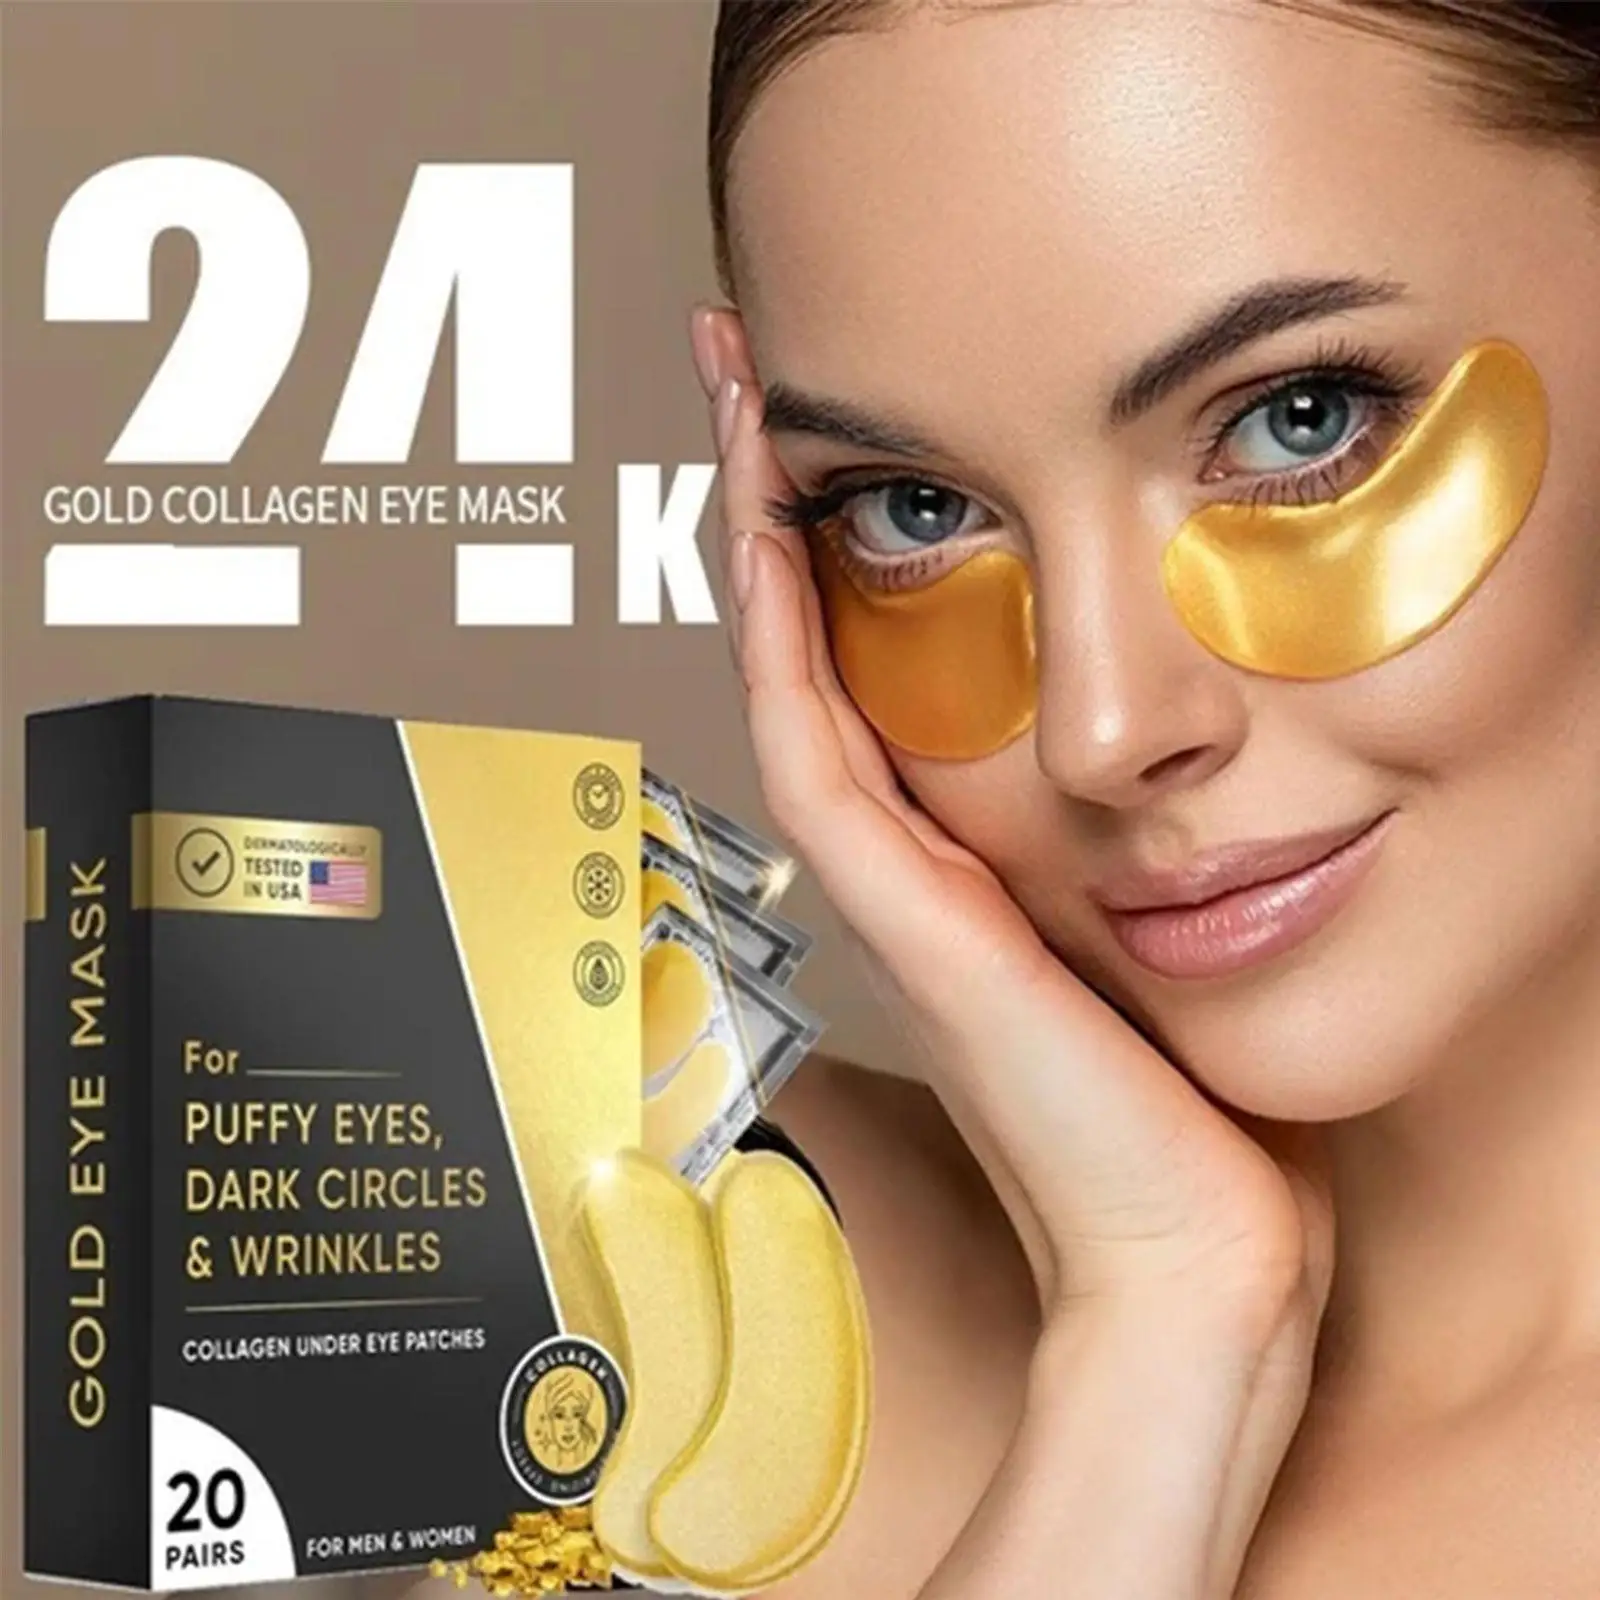 

20 Pairs 24K Gold Eye Mask Moisturizing Firming Anti Remove Eye Patches Wrinkles Gel Circles Collagen Dark Aging A4V6